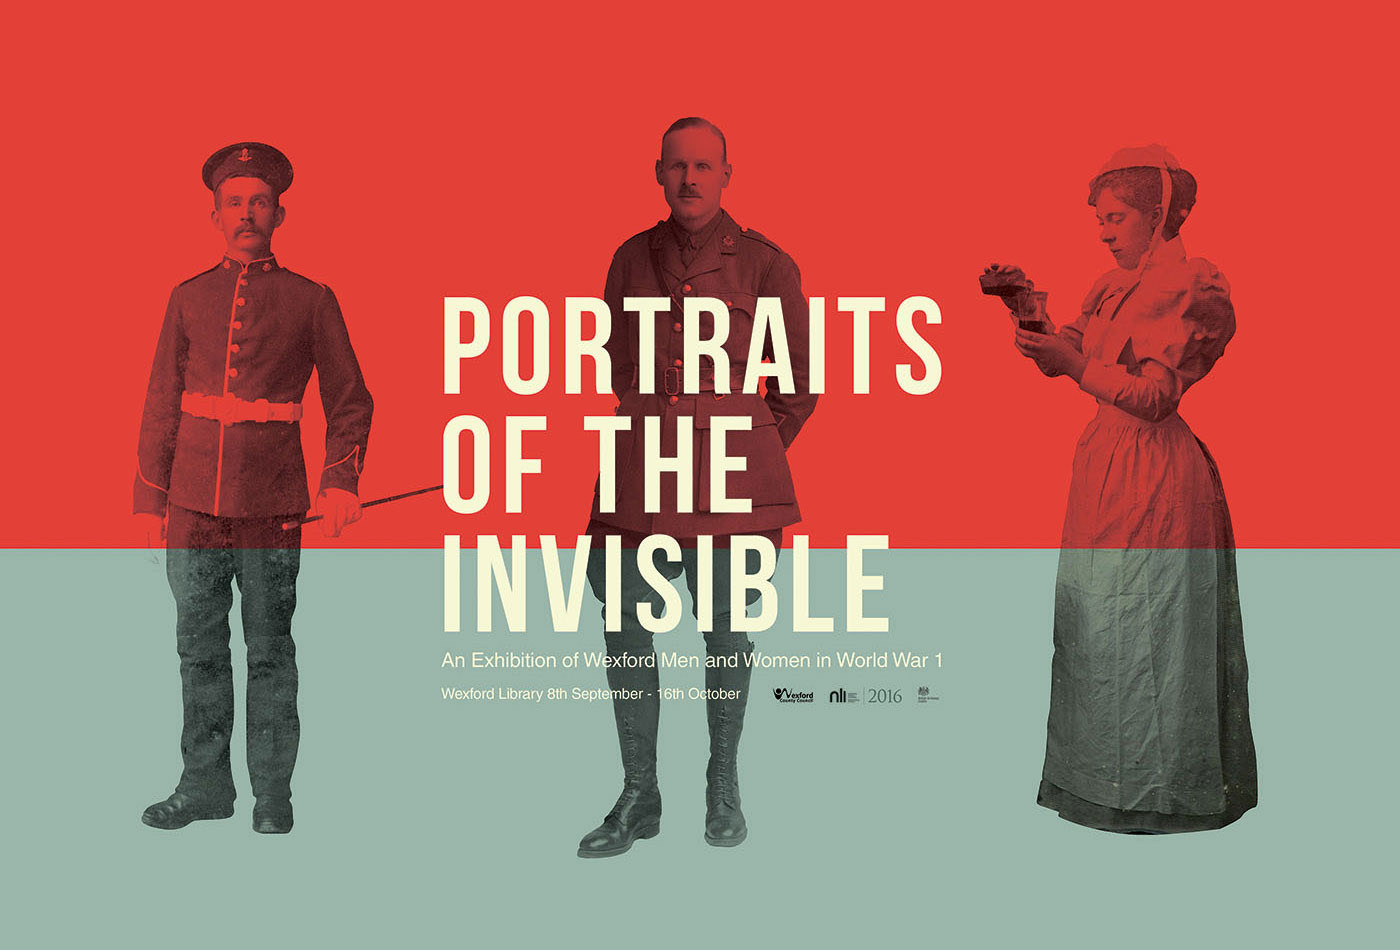 Lands, Graphic Design, Portraits of the Invisible, Exhibition, Digital